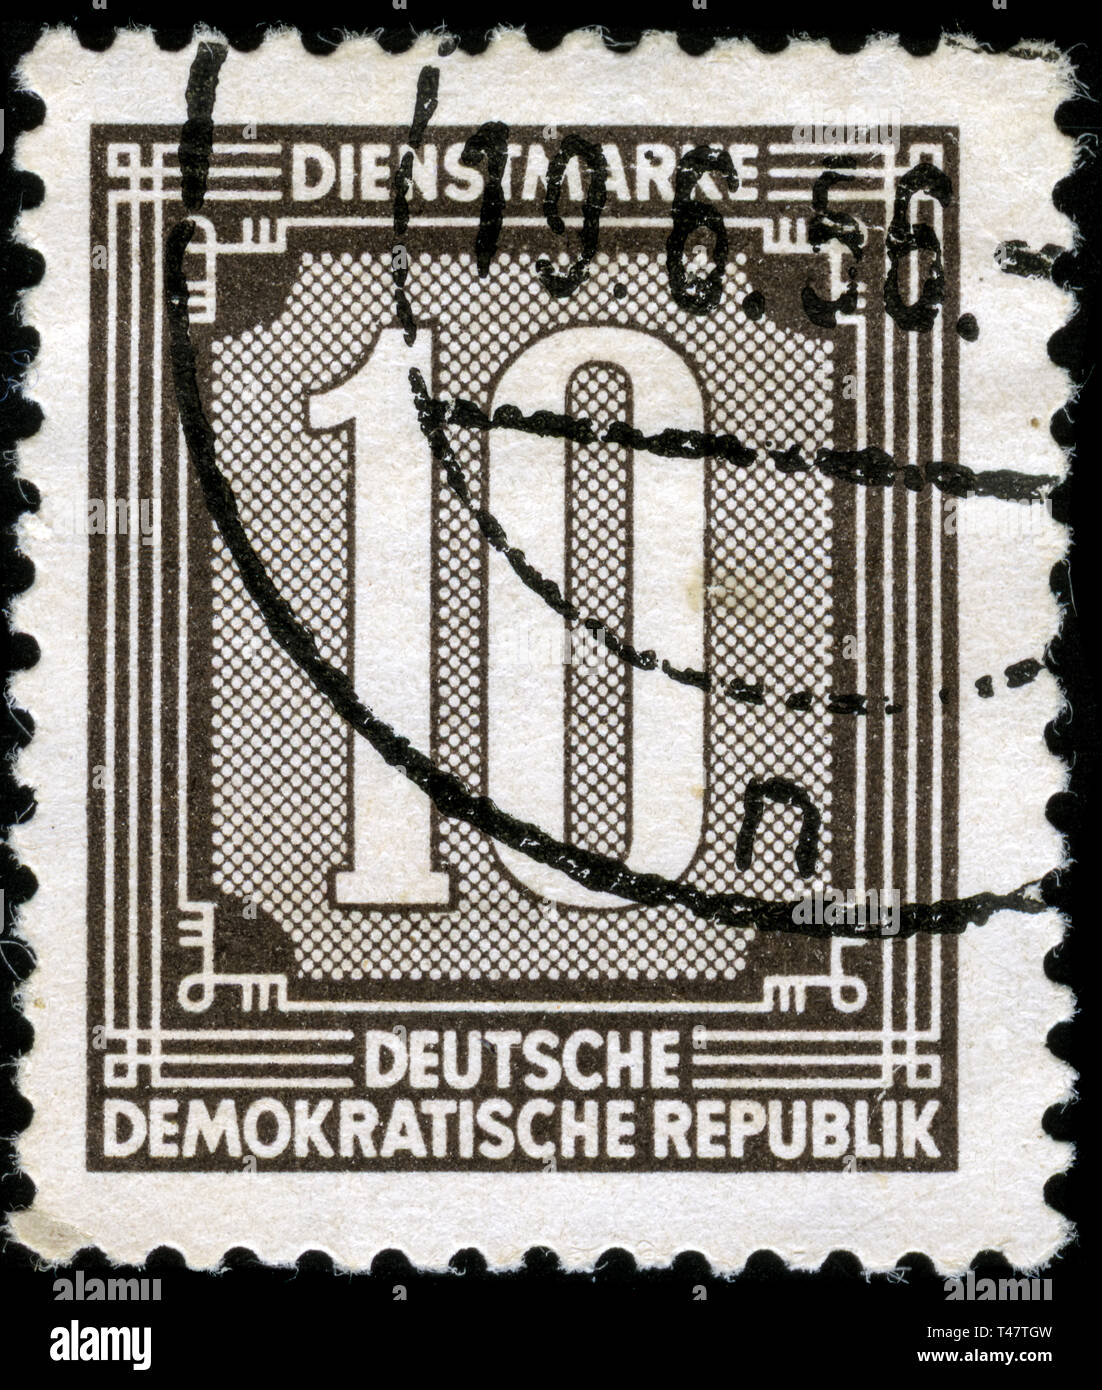 Postage stamp from East Germany (DDR)  in the Digits series issued in 1956 Stock Photo